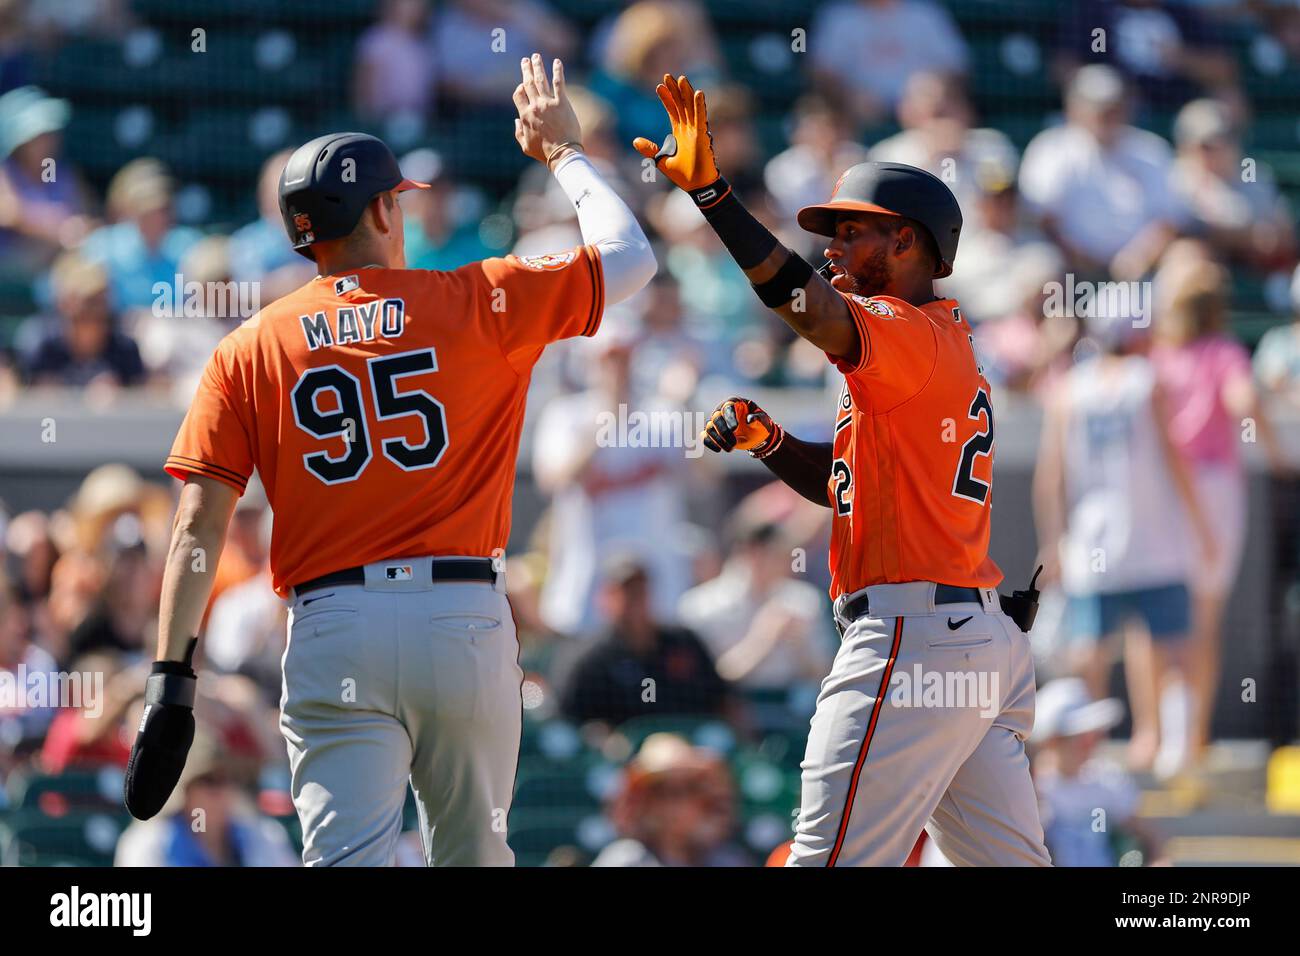 Lakeland FL USA; Baltimore Orioles infielder Colby Mayo (95) congratulates infielder Lewin Diaz after he scored during an MLB spring training game aga Stock Photo